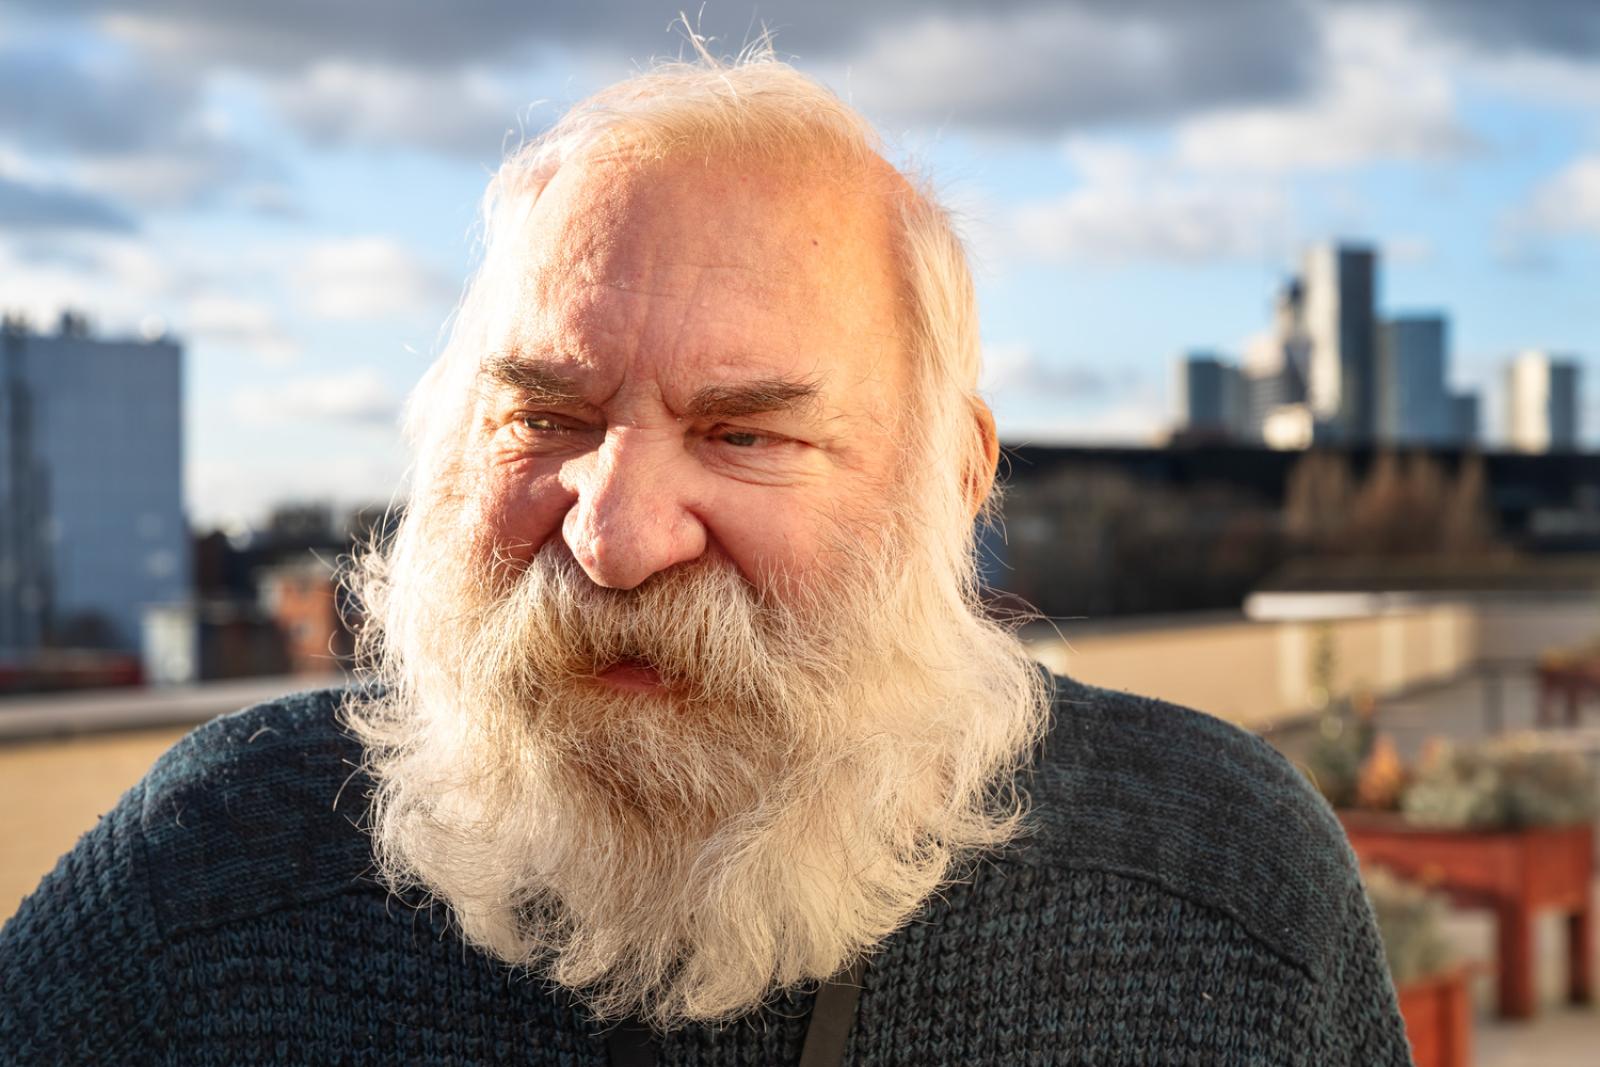 a man with long white beard and hair is in the foreground with the skyline of Manchester behind